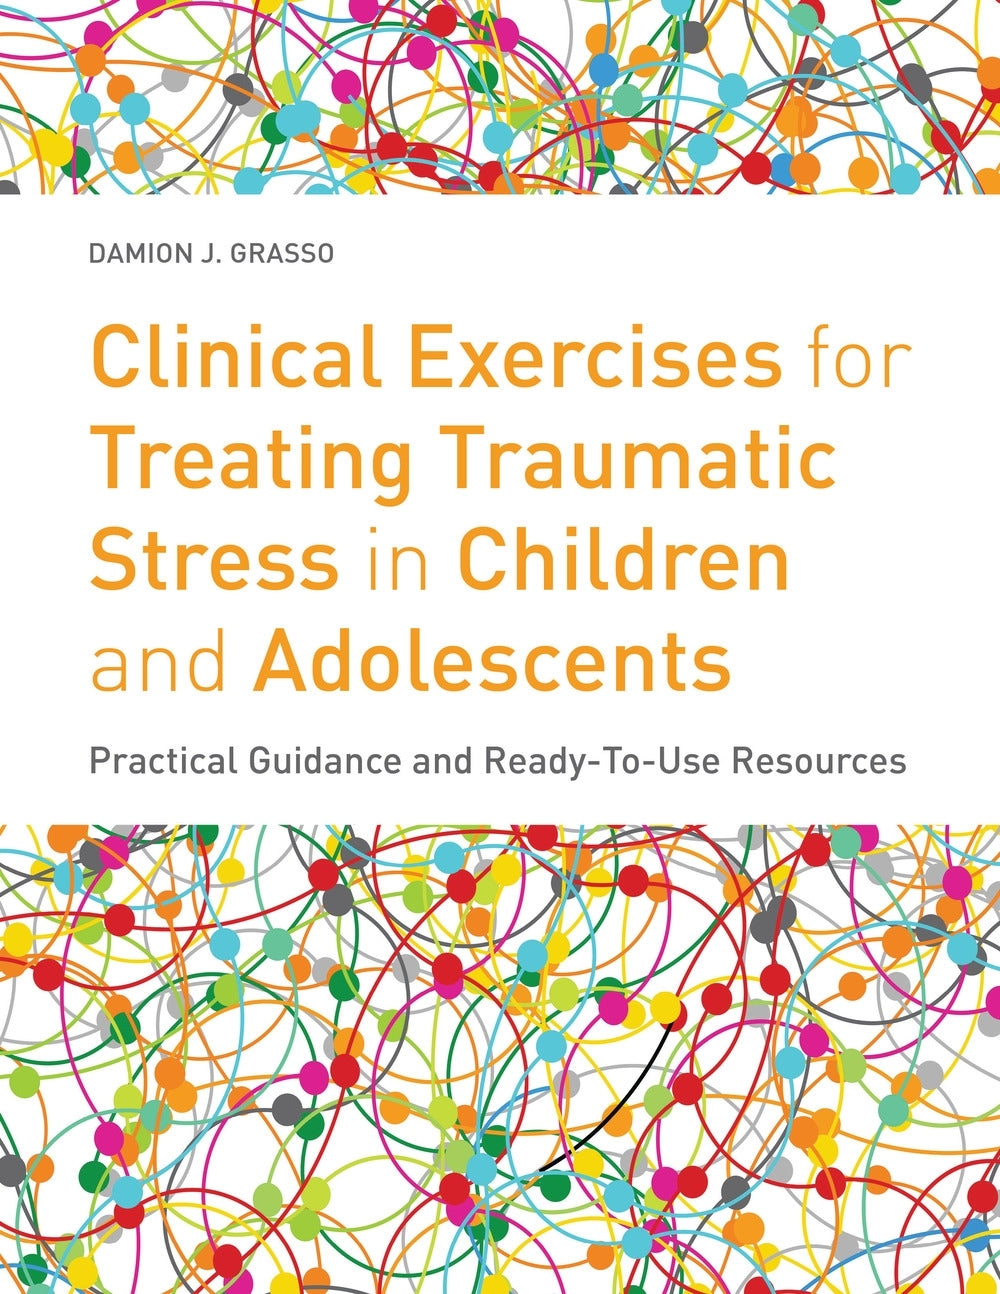 Clinical Exercises for Treating Traumatic Stress in Children and Adolescents by Damion J. Grasso